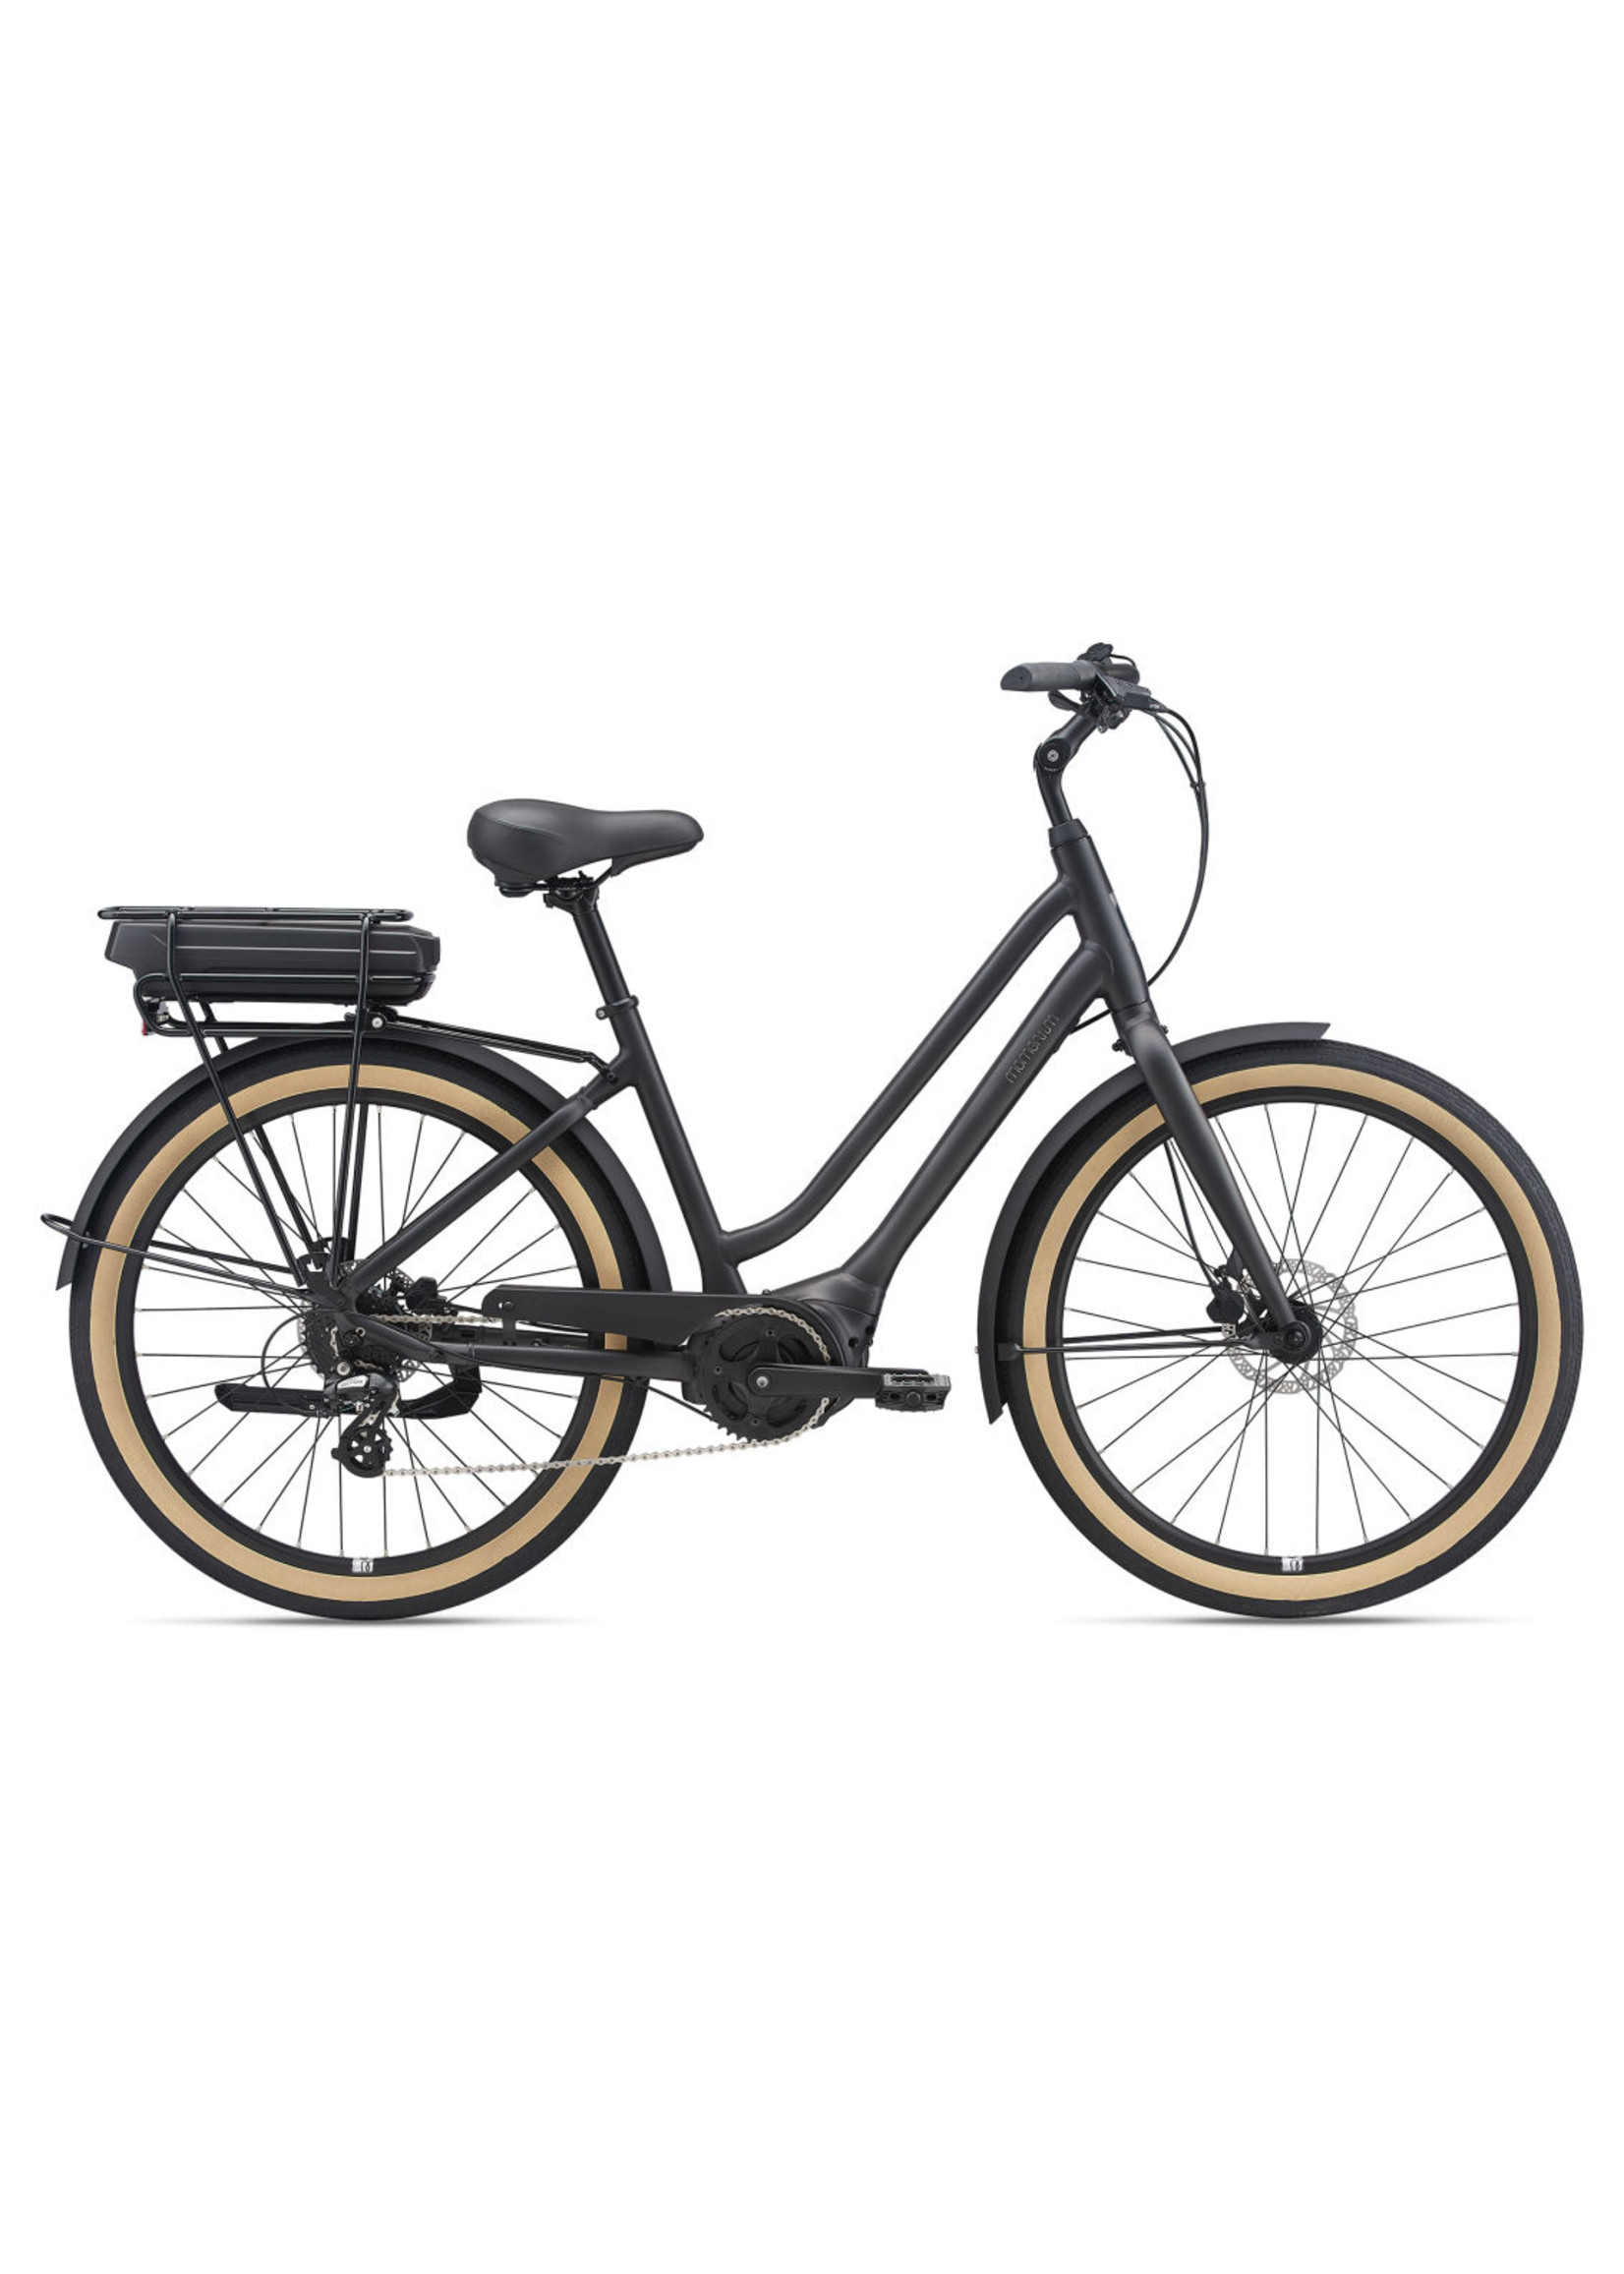 Momentum Momentum Lafree eBike, step though (Giant Bicycles)